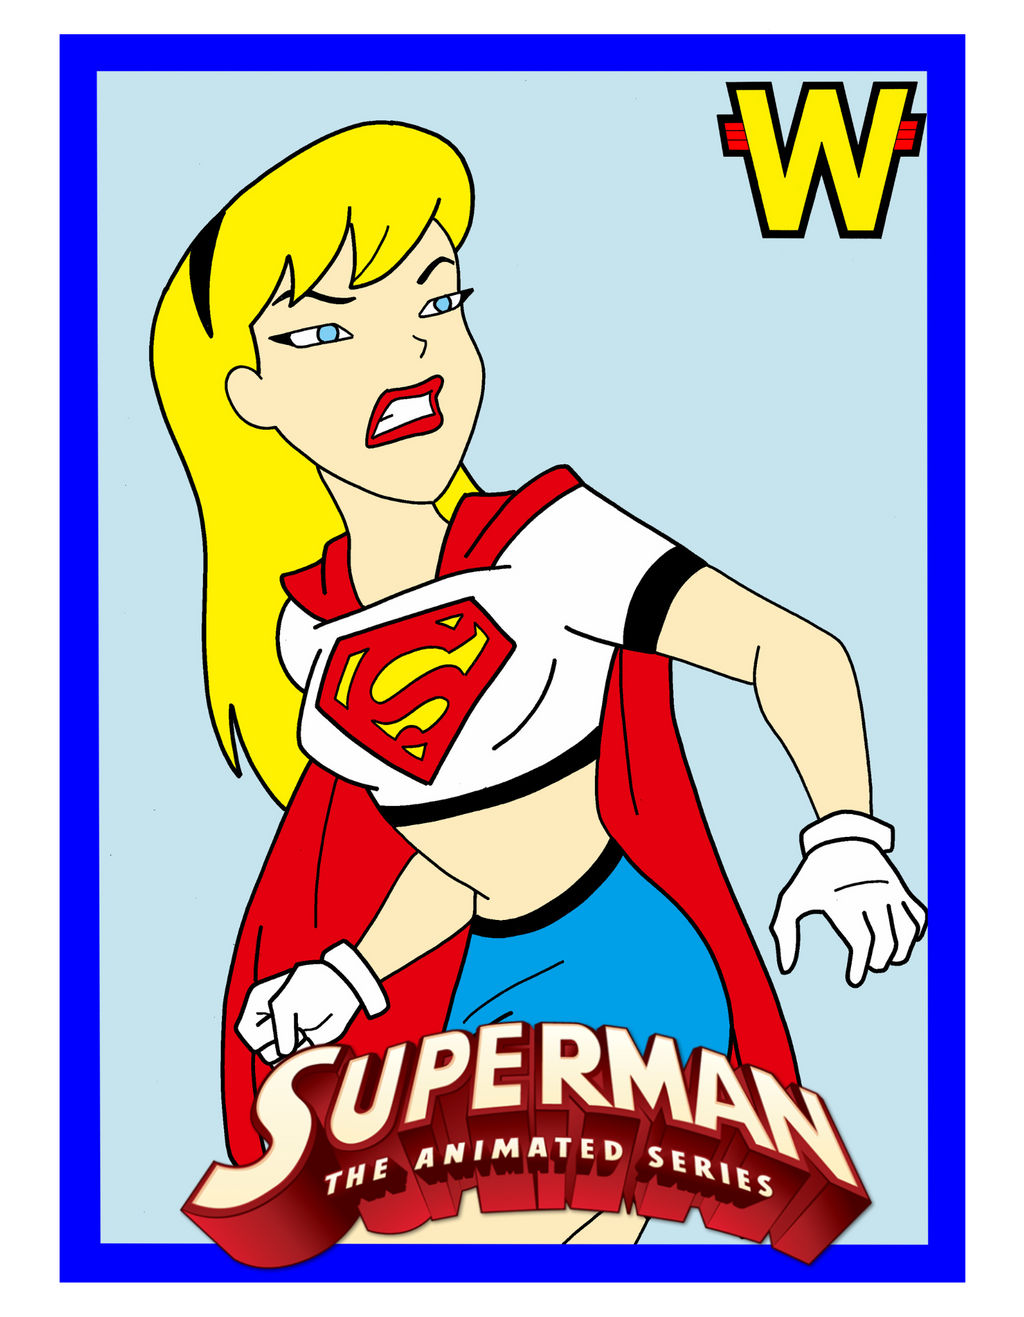 1998 Super Girl From Superman Animated Series by donandron on DeviantArt